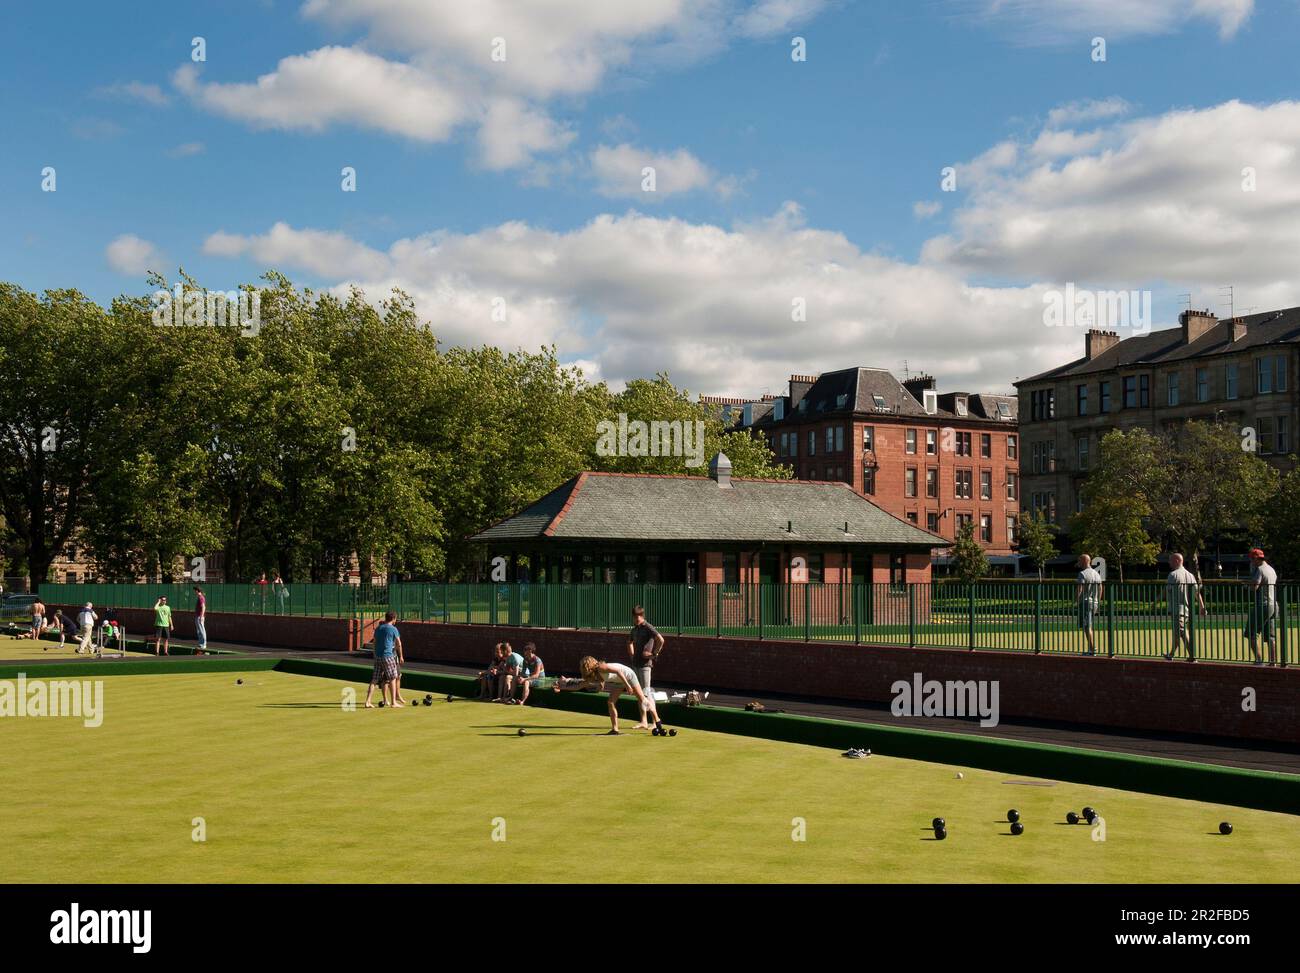 Bowls in play in front of the pavilion at the Kelvingrove lawn bowling green in Glasgow, Scotland, UK Stock Photo